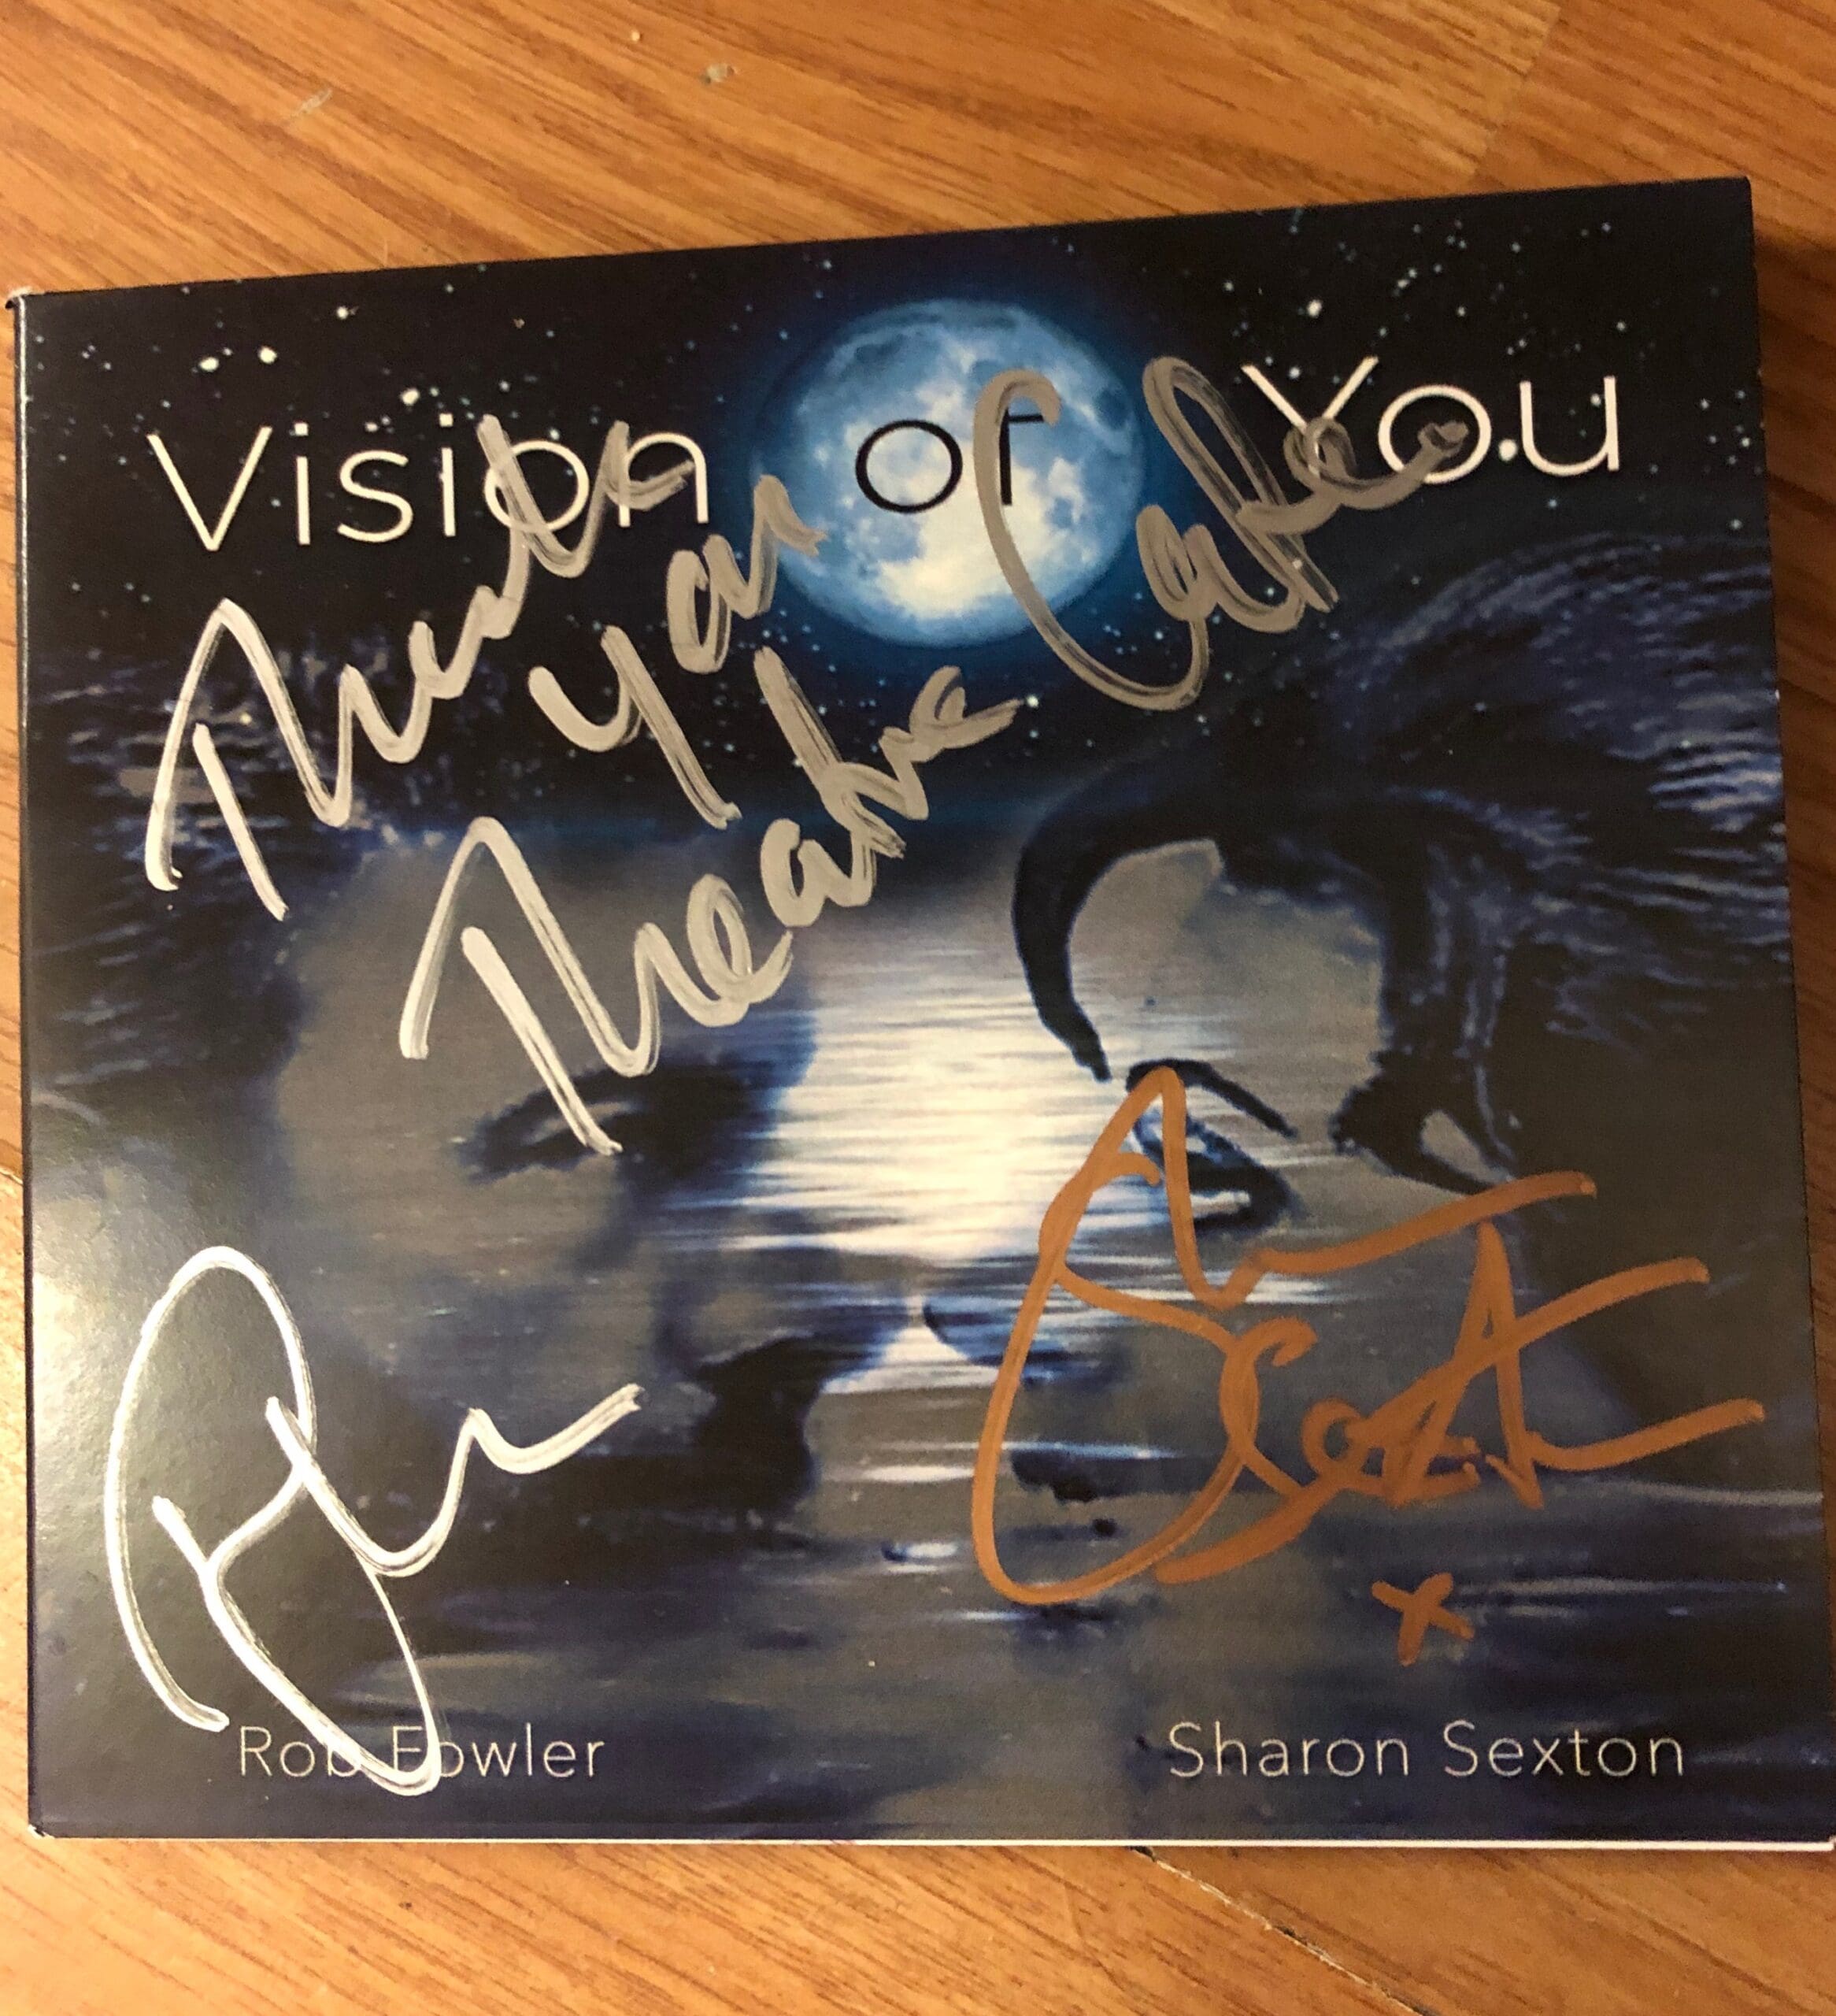 Featured image for “Enter our competition for a chance to win a Vision of You CD signed by Sharon Sexton and Rob Fowler”